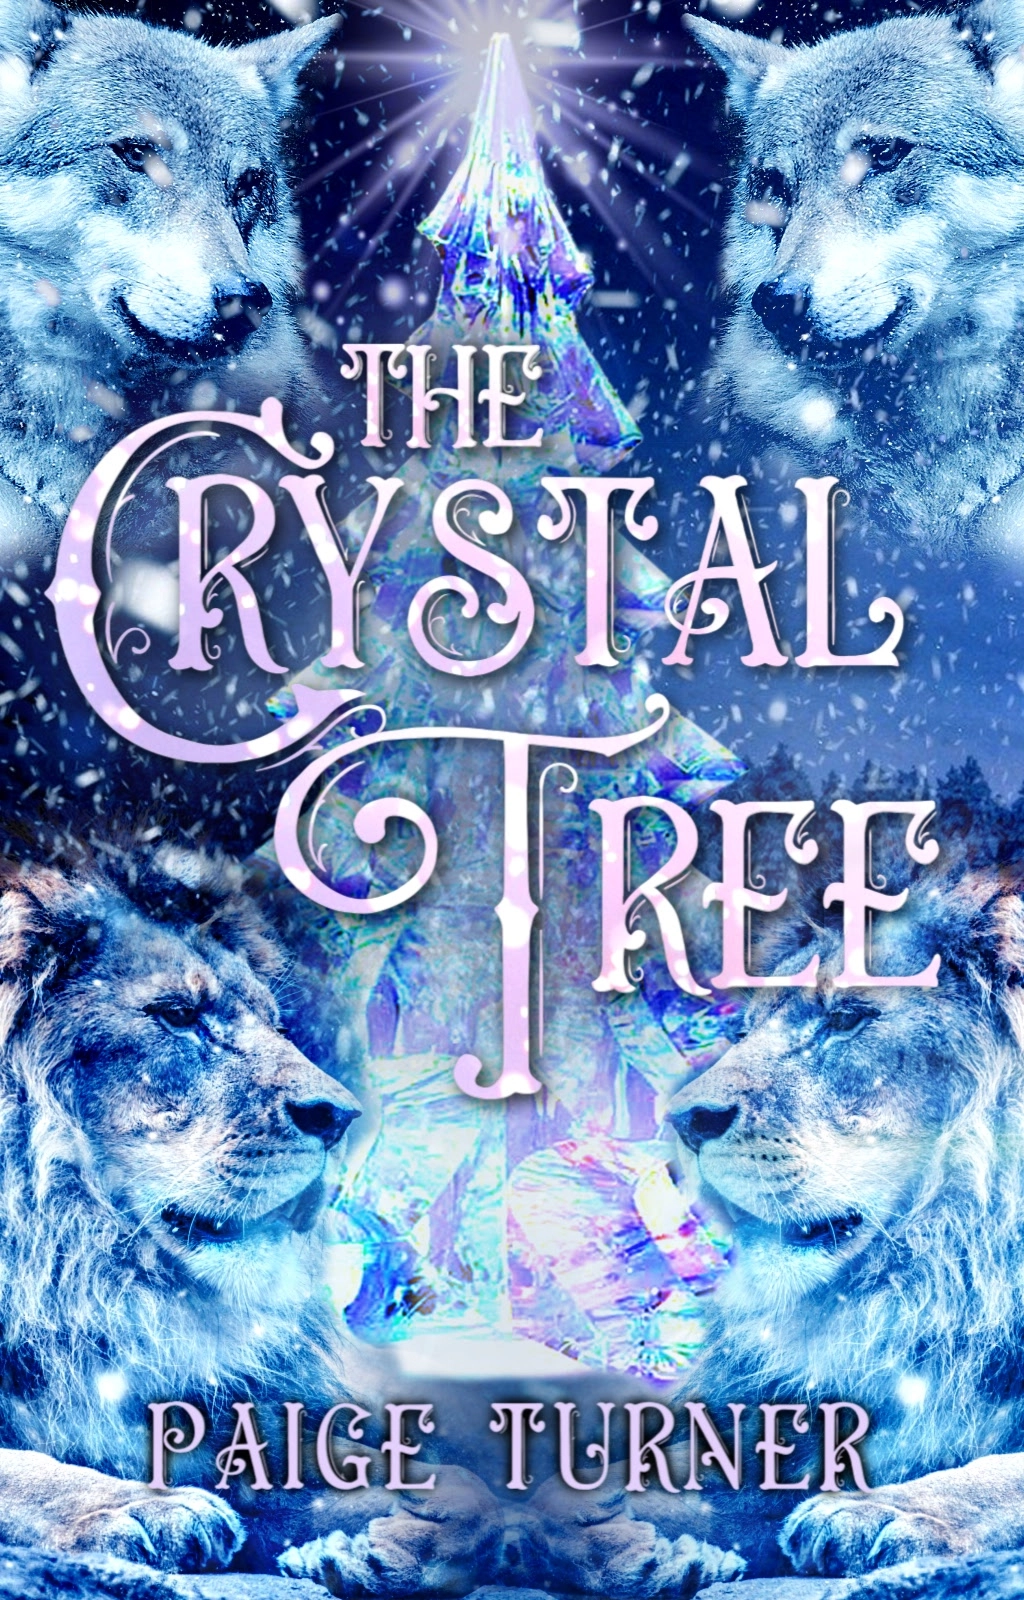 617-the-crystal-tree-cover-2.jpg